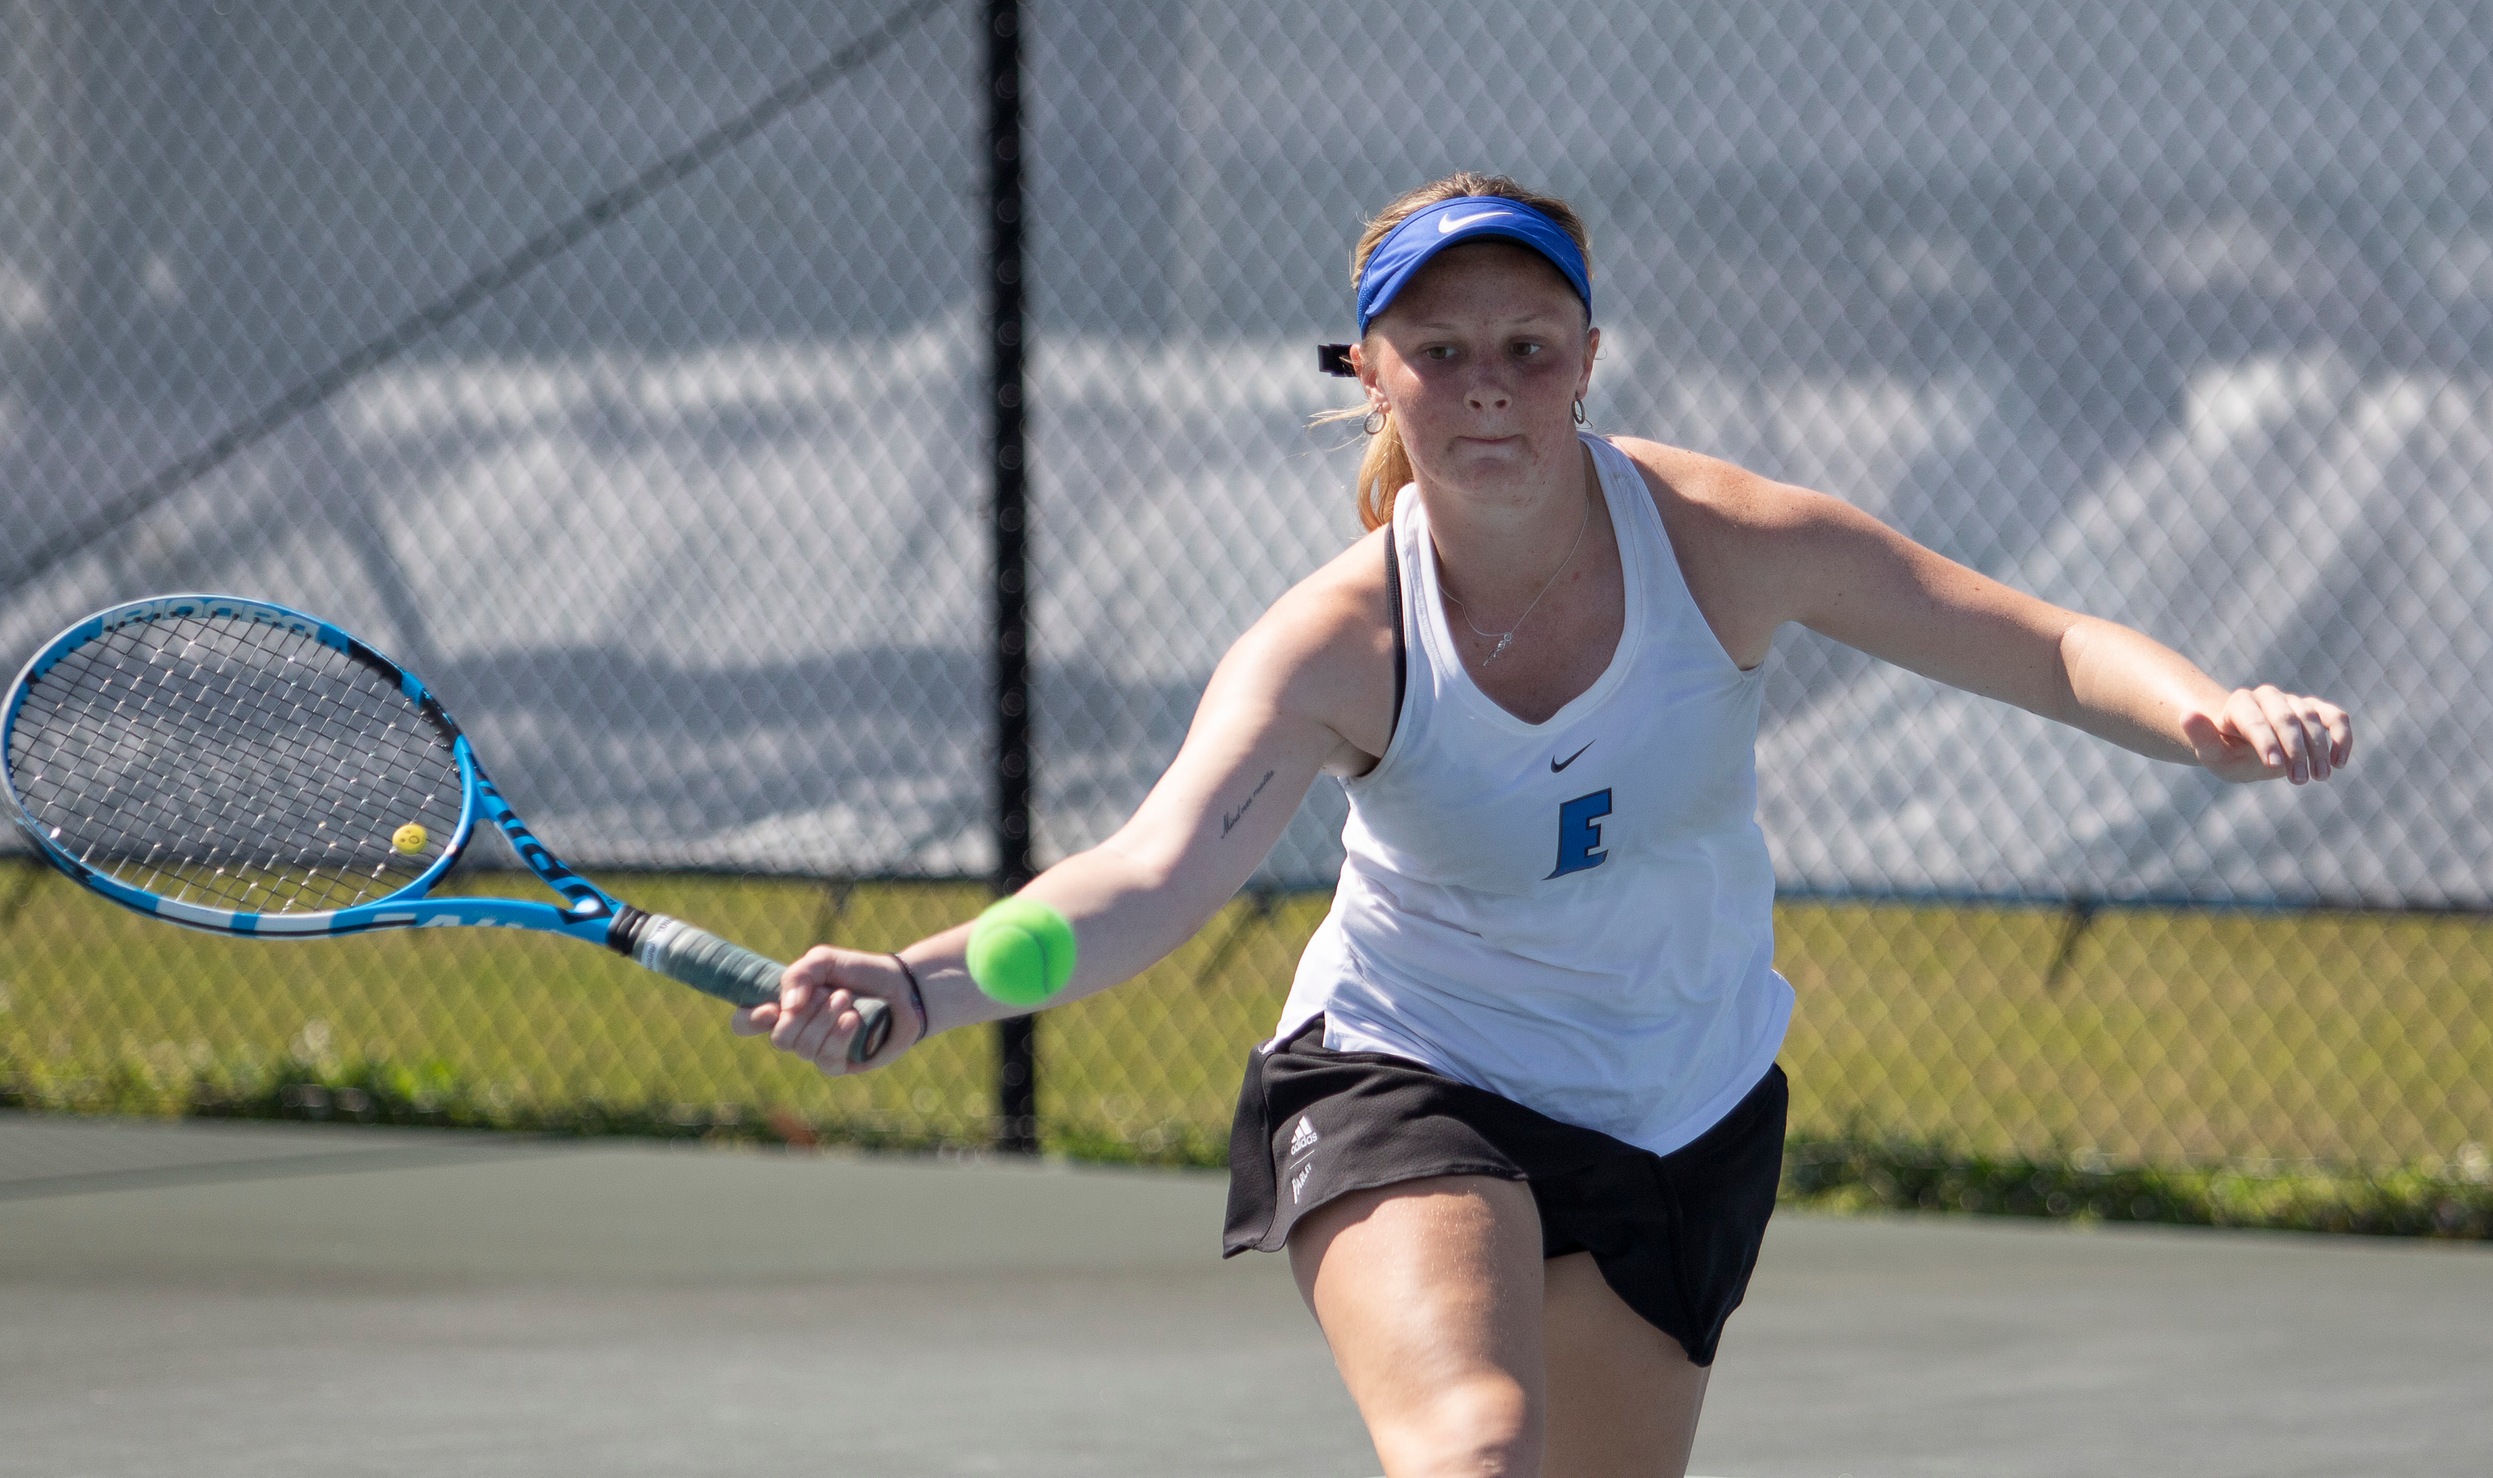 Women's tennis team loses conference match on road